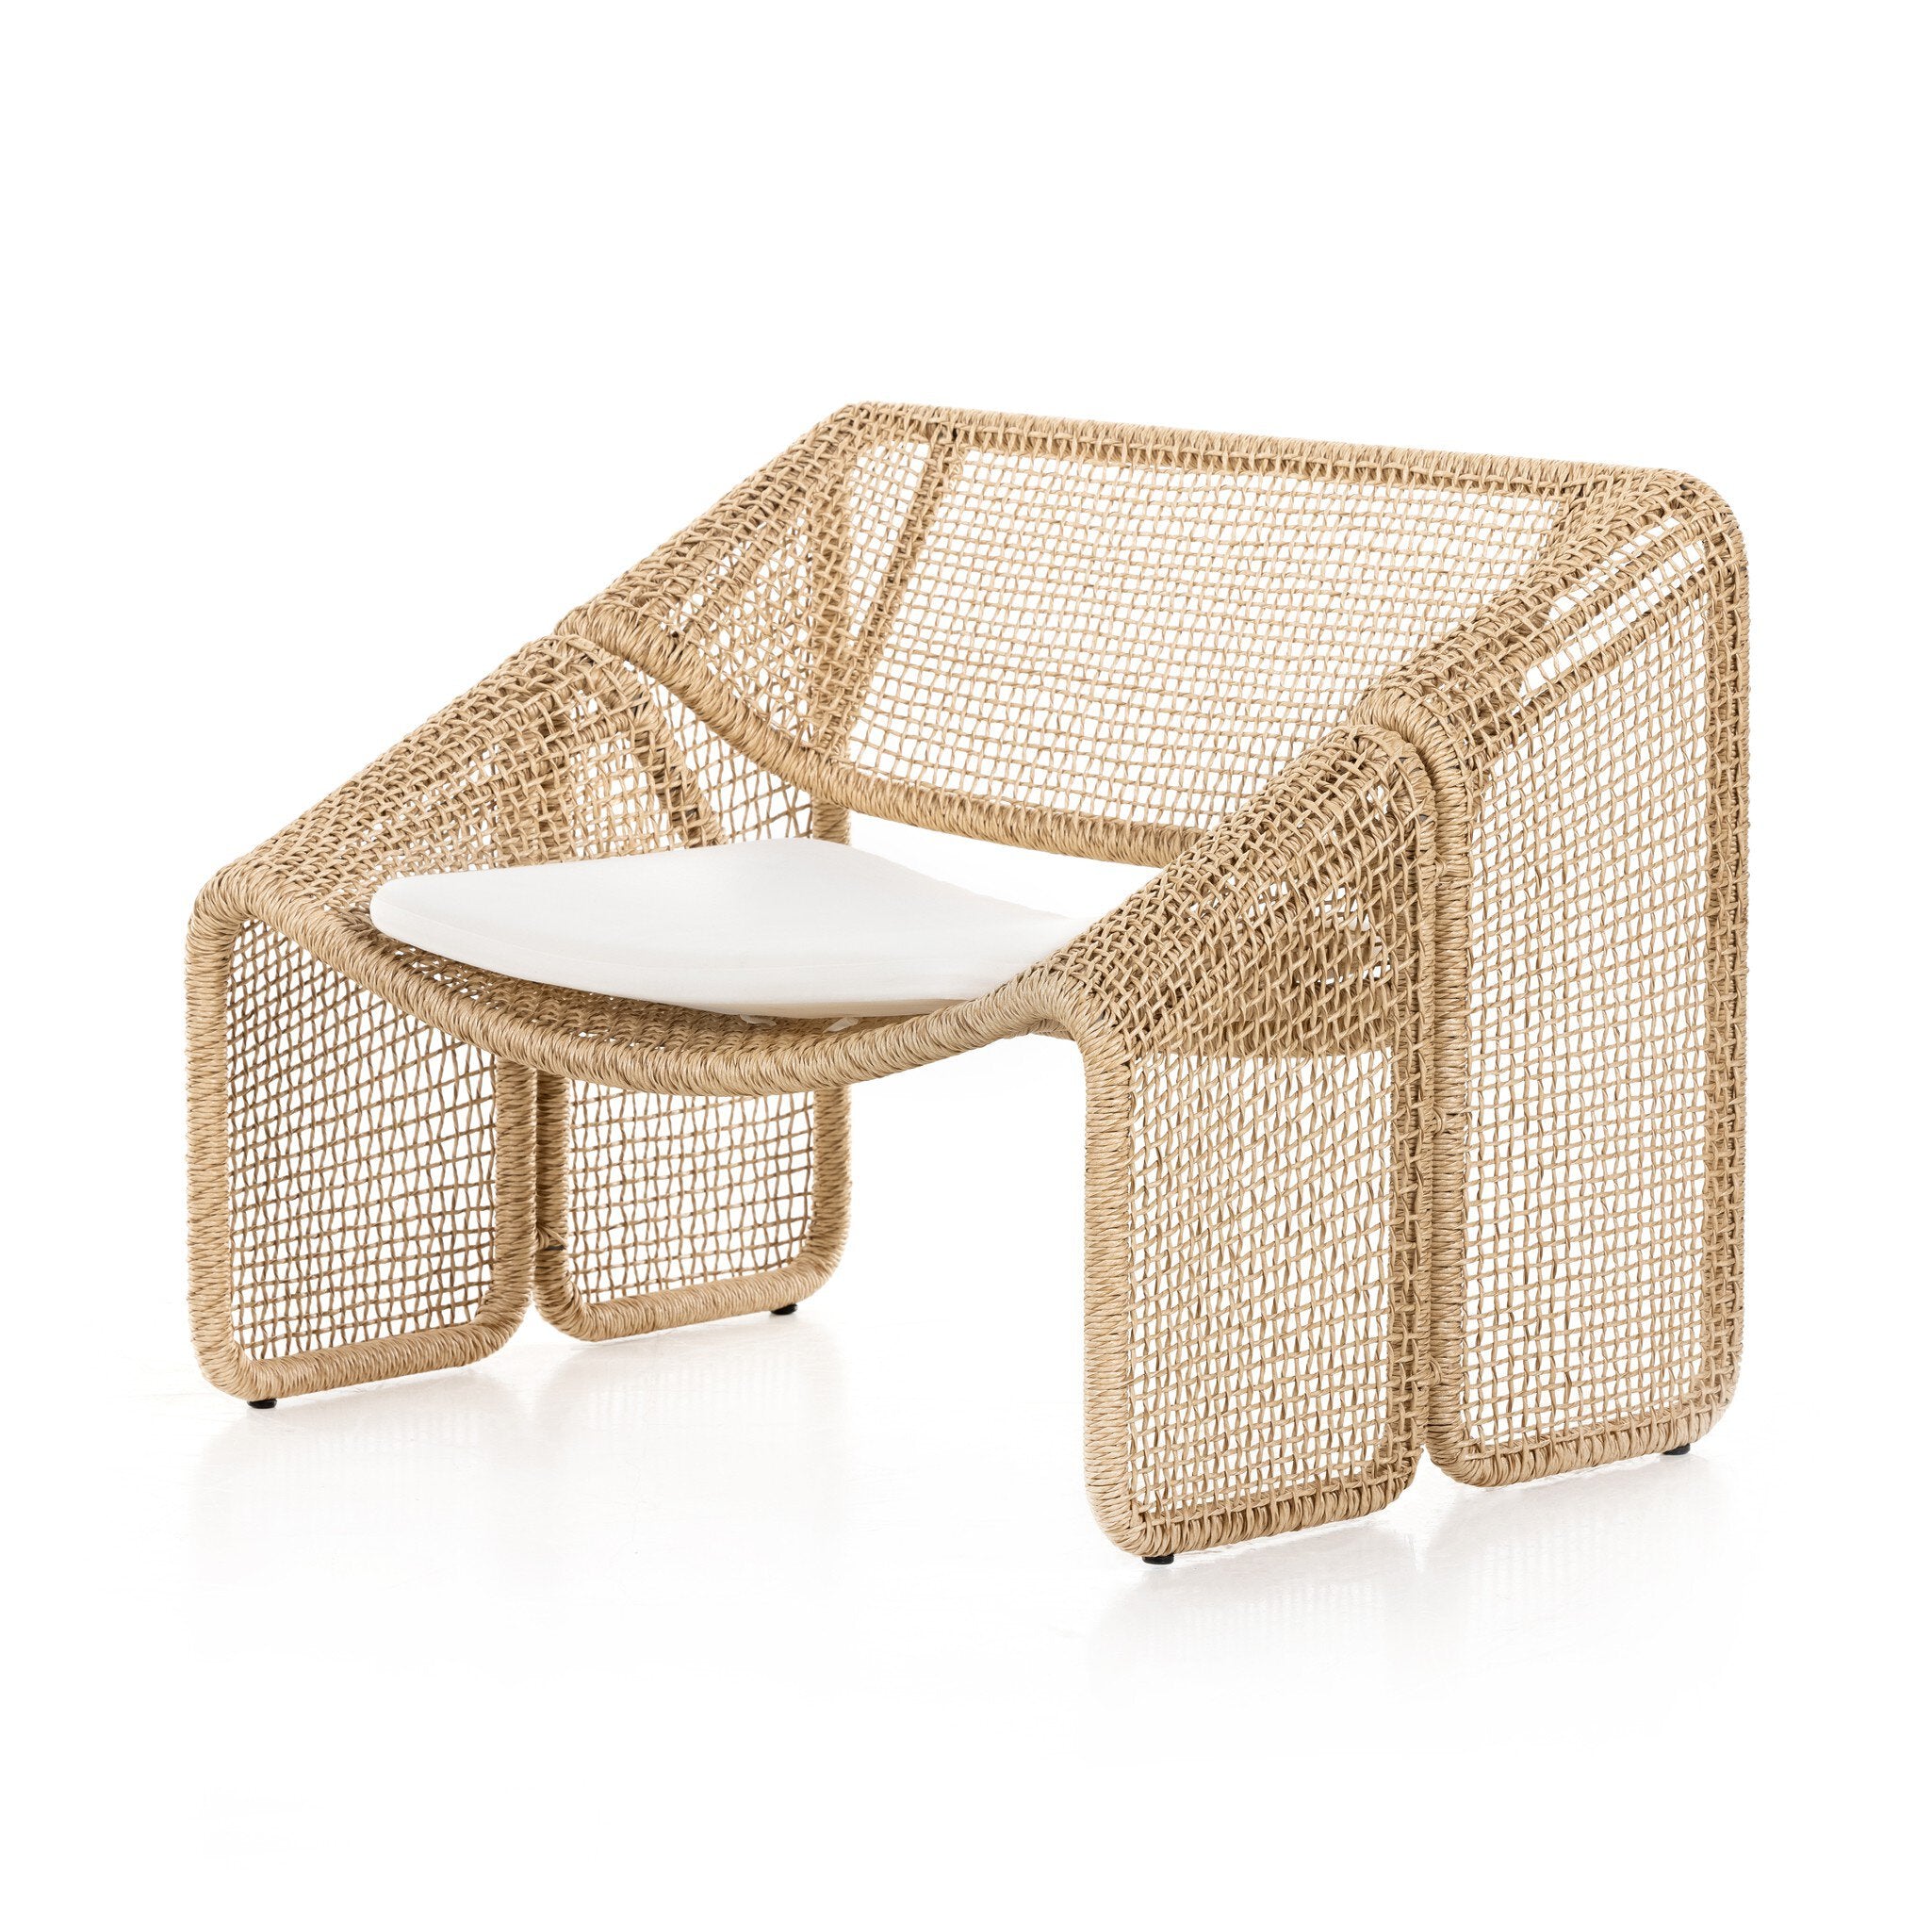 Selma Outdoor Chair - Venao Ivory